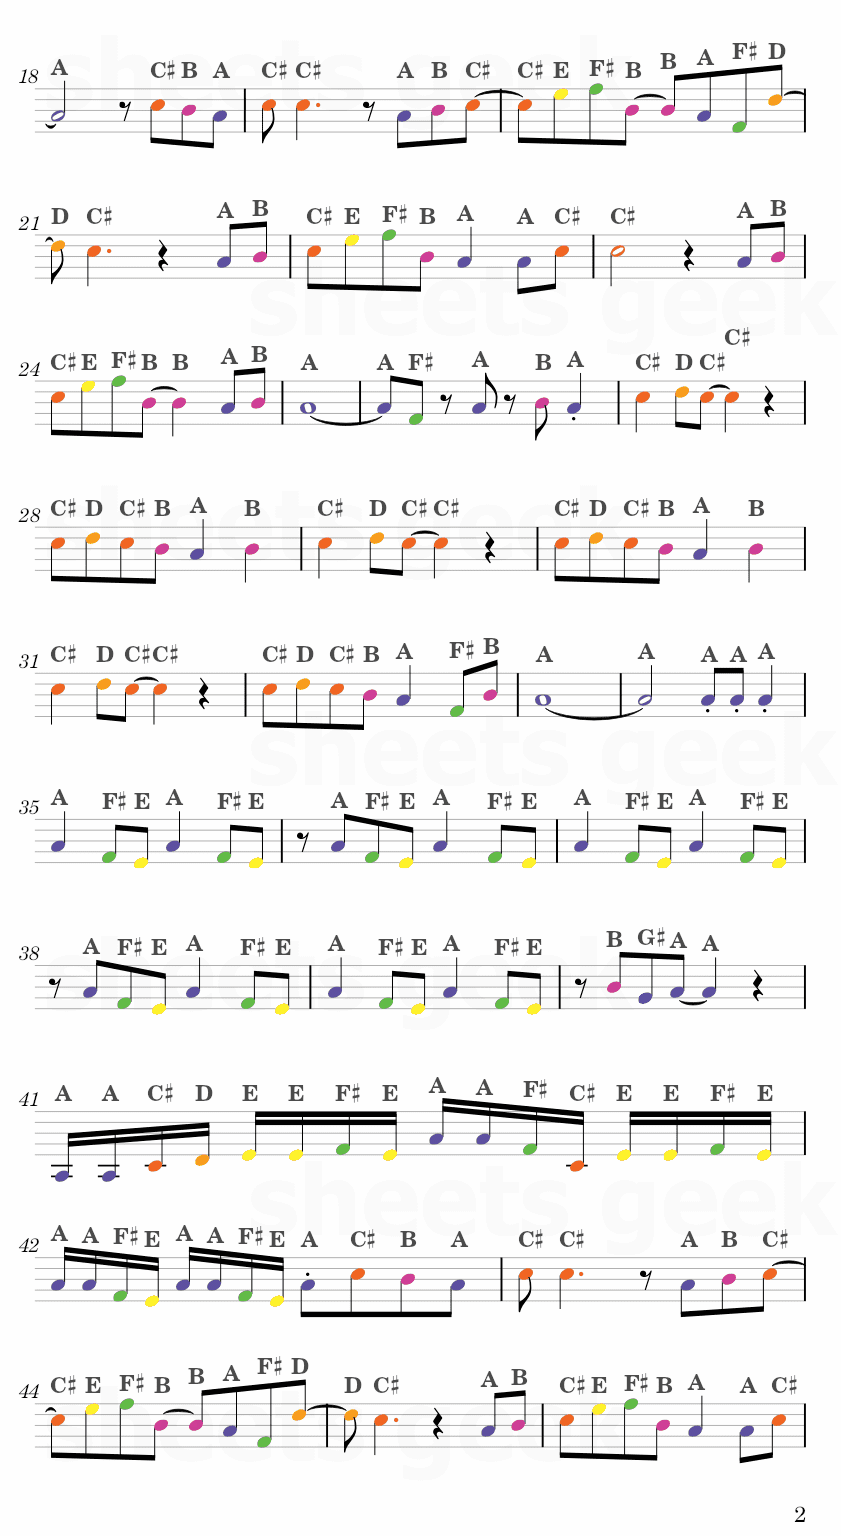 September - Earth, Wind & Fire Easy Sheet Music Free for piano, keyboard, flute, violin, sax, cello page 2